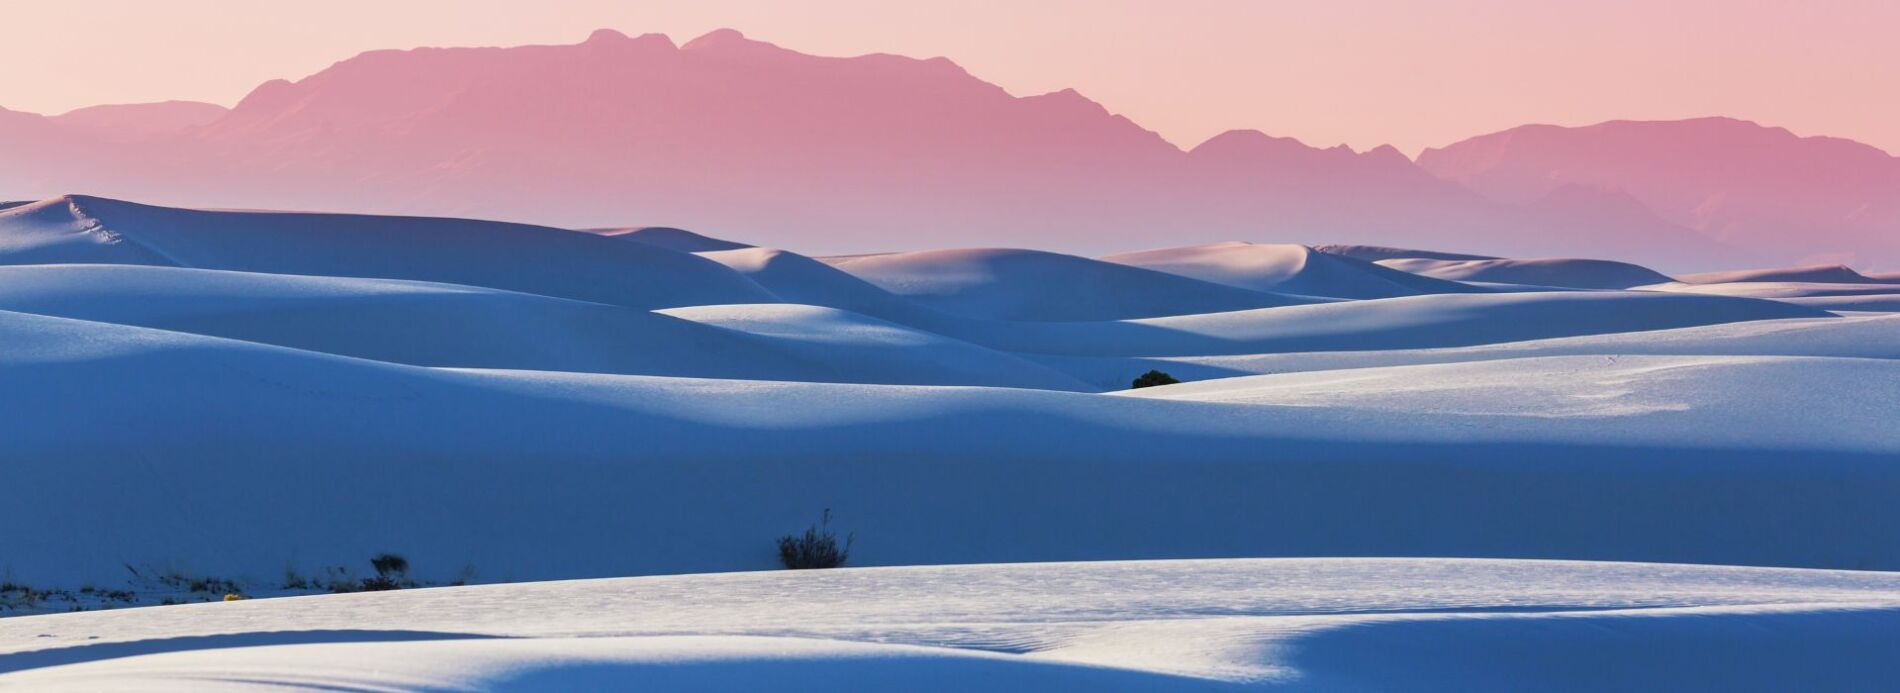 sunset in white sands national park New Mexico